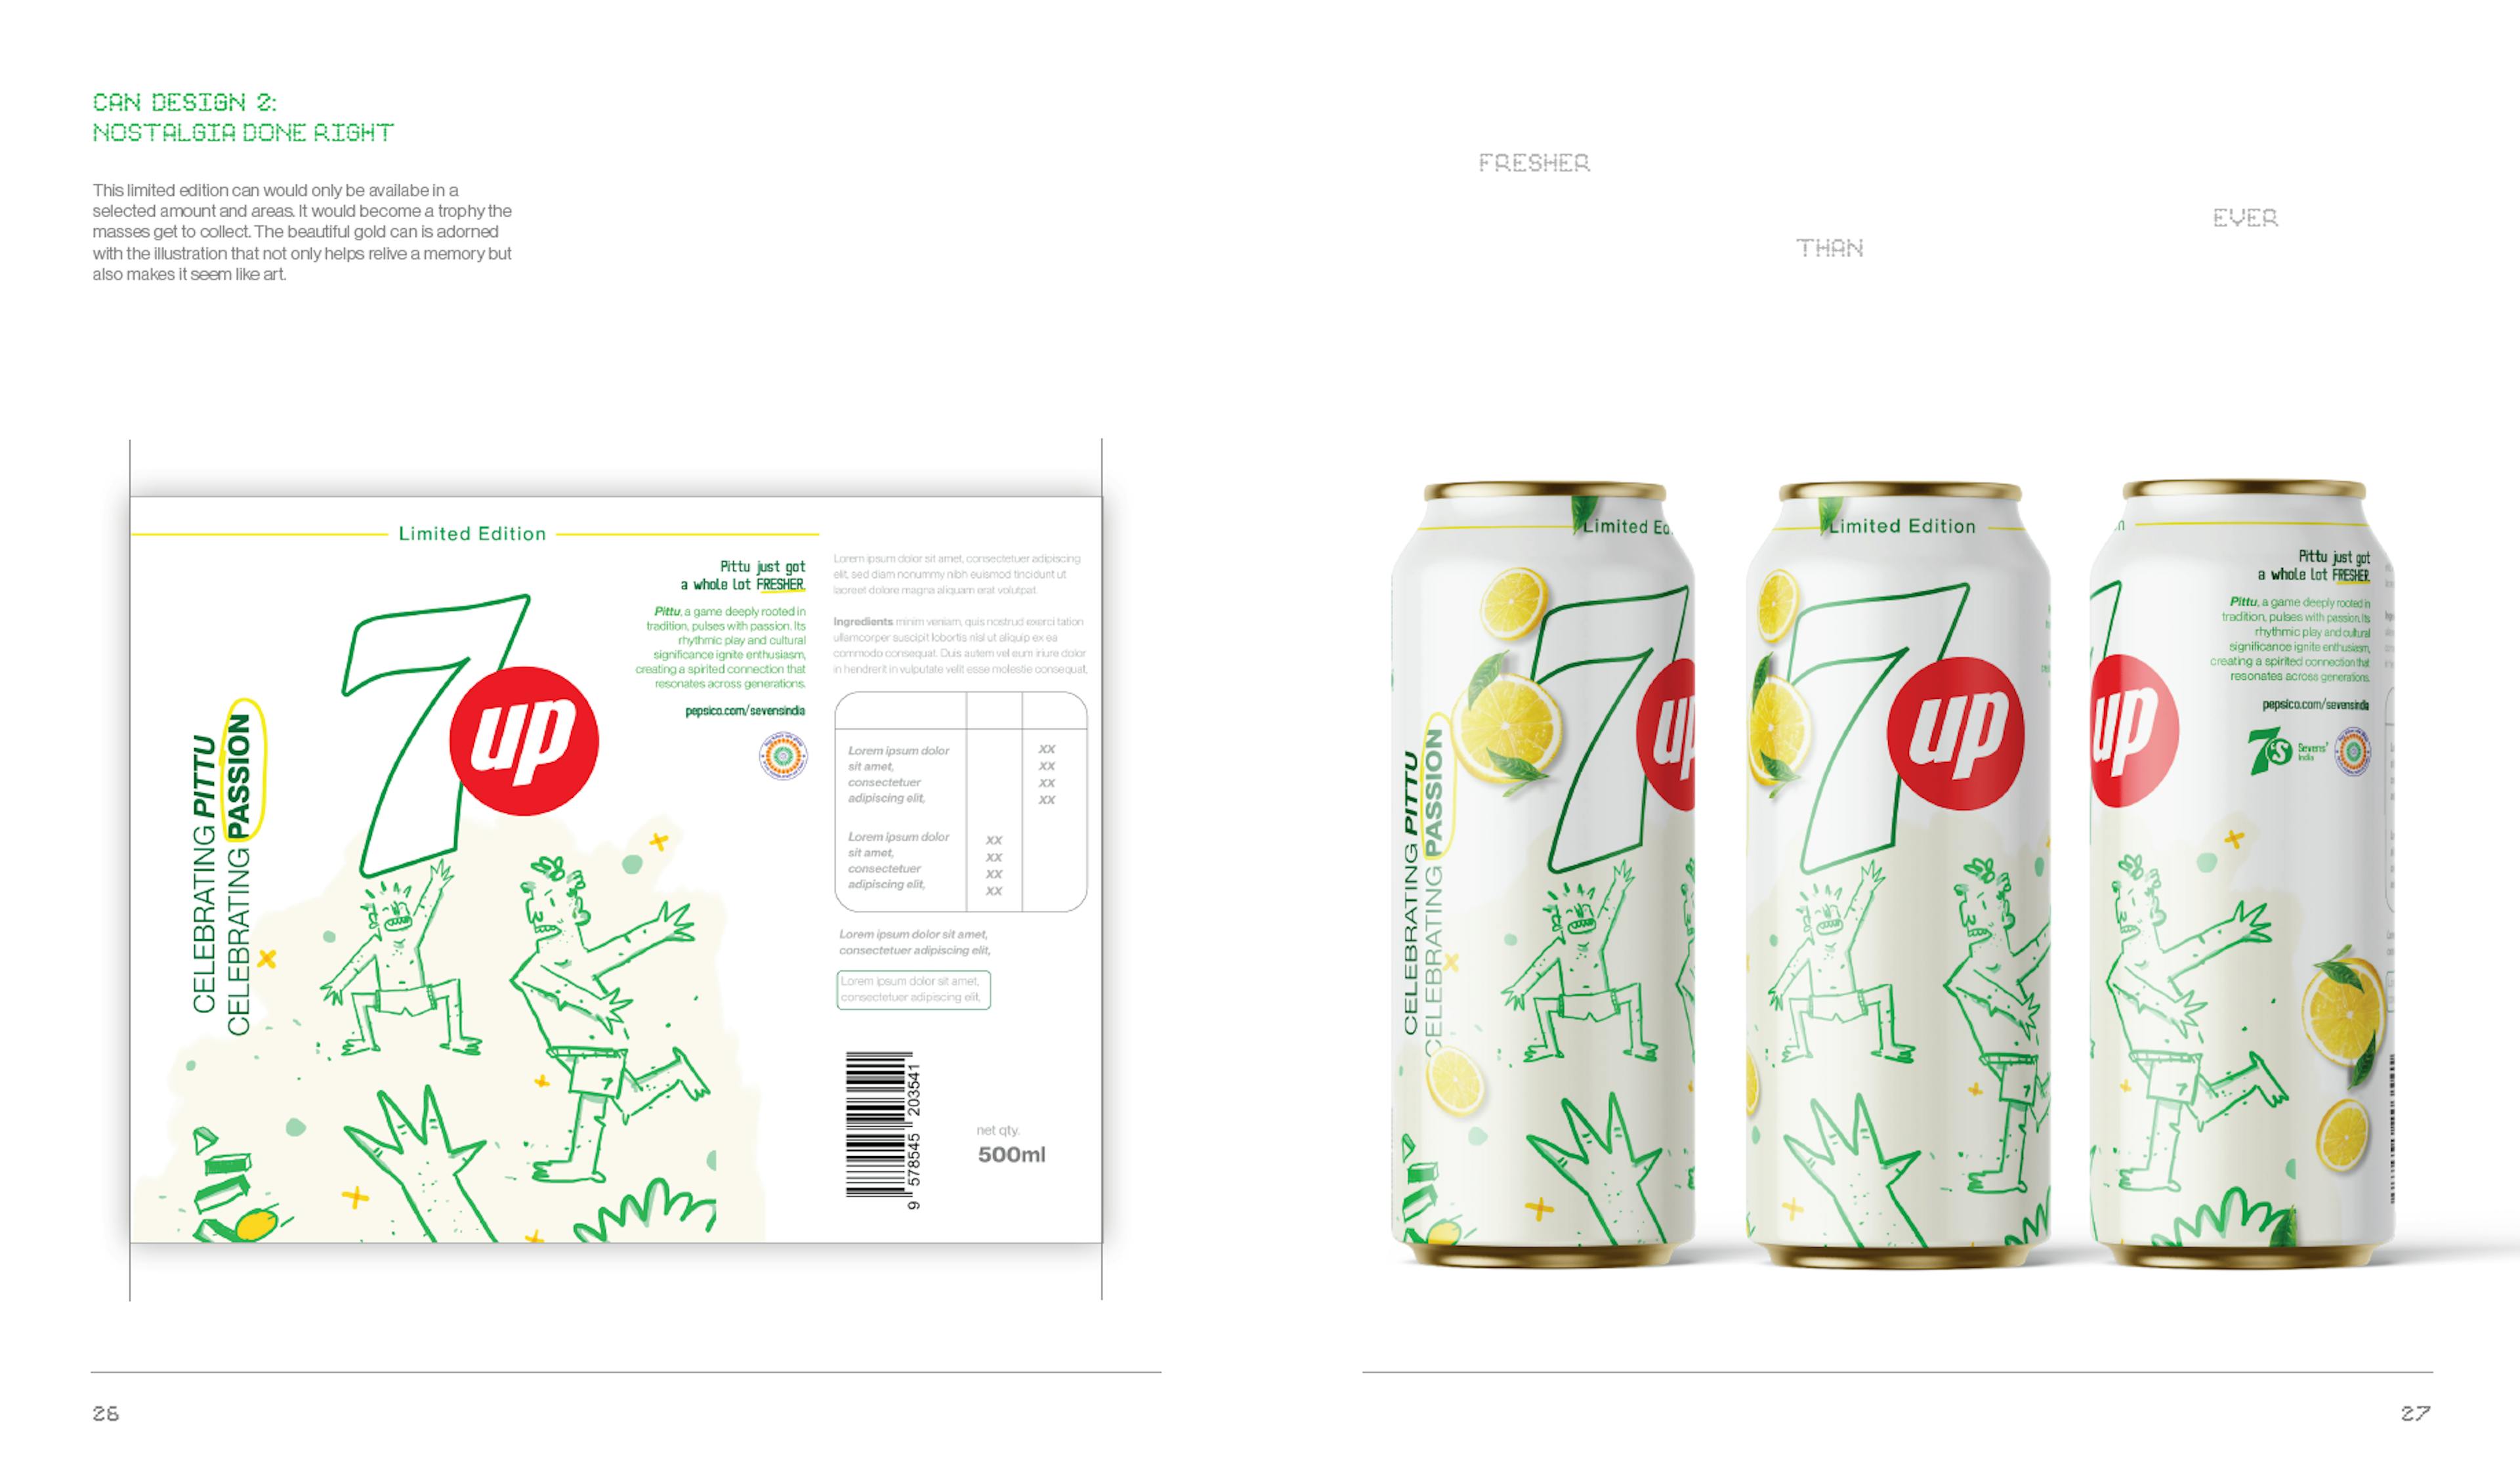 7up can design